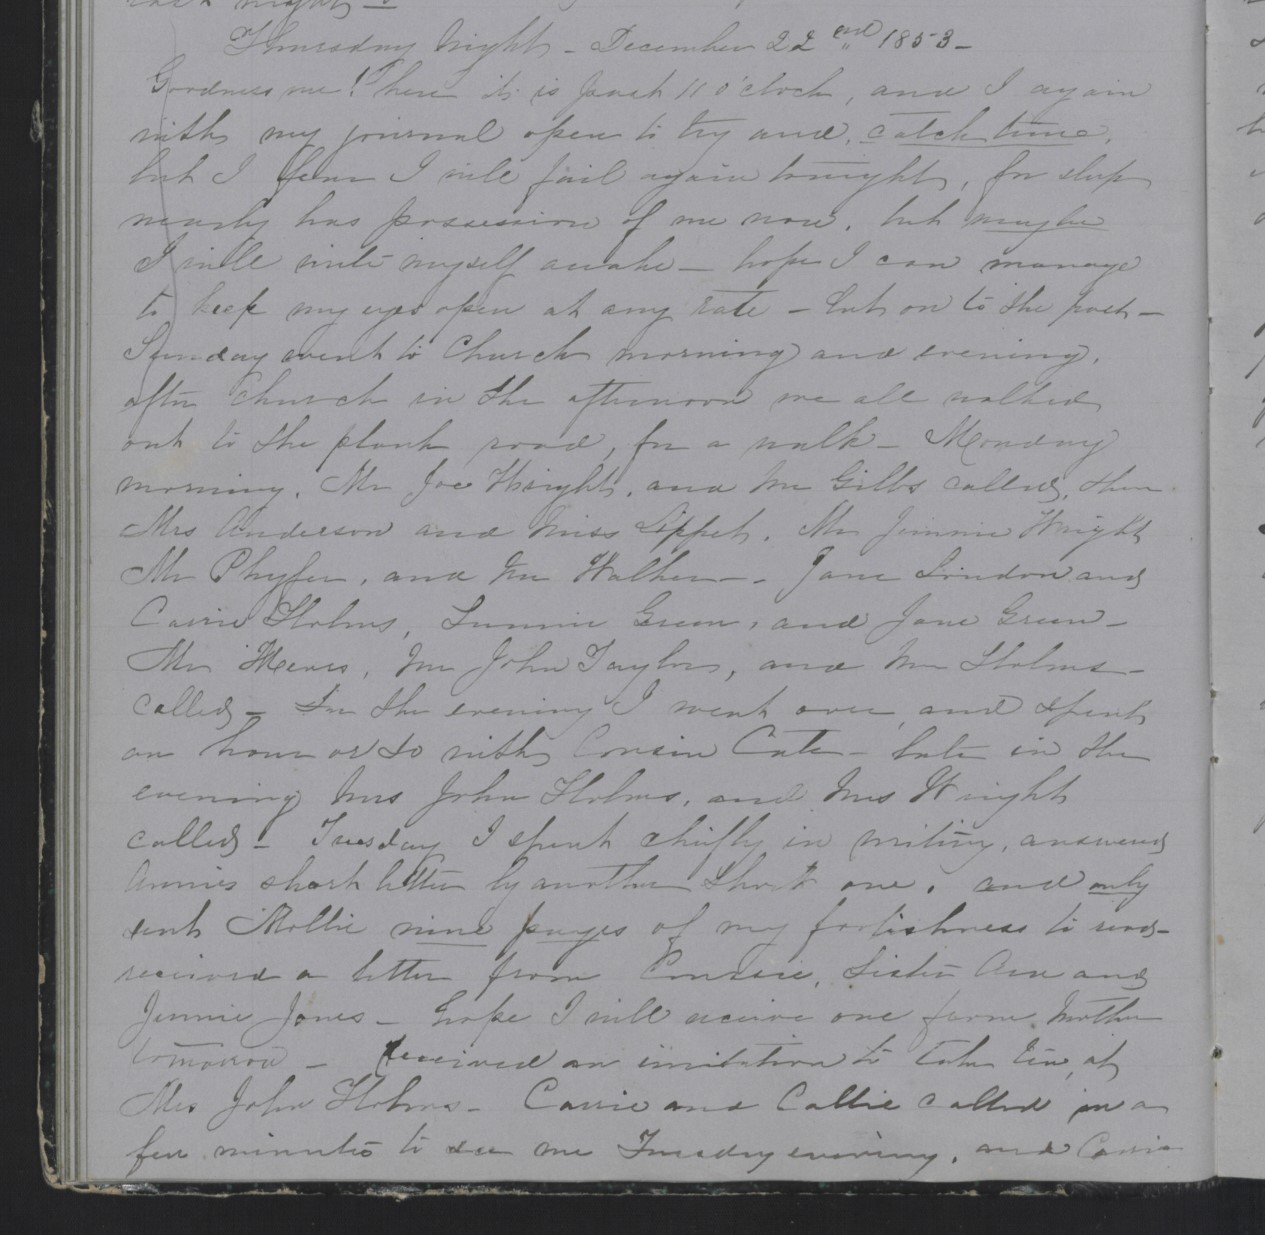 Diary Entry from Margaret Eliza Cotten, 22 December 1853, Page 1